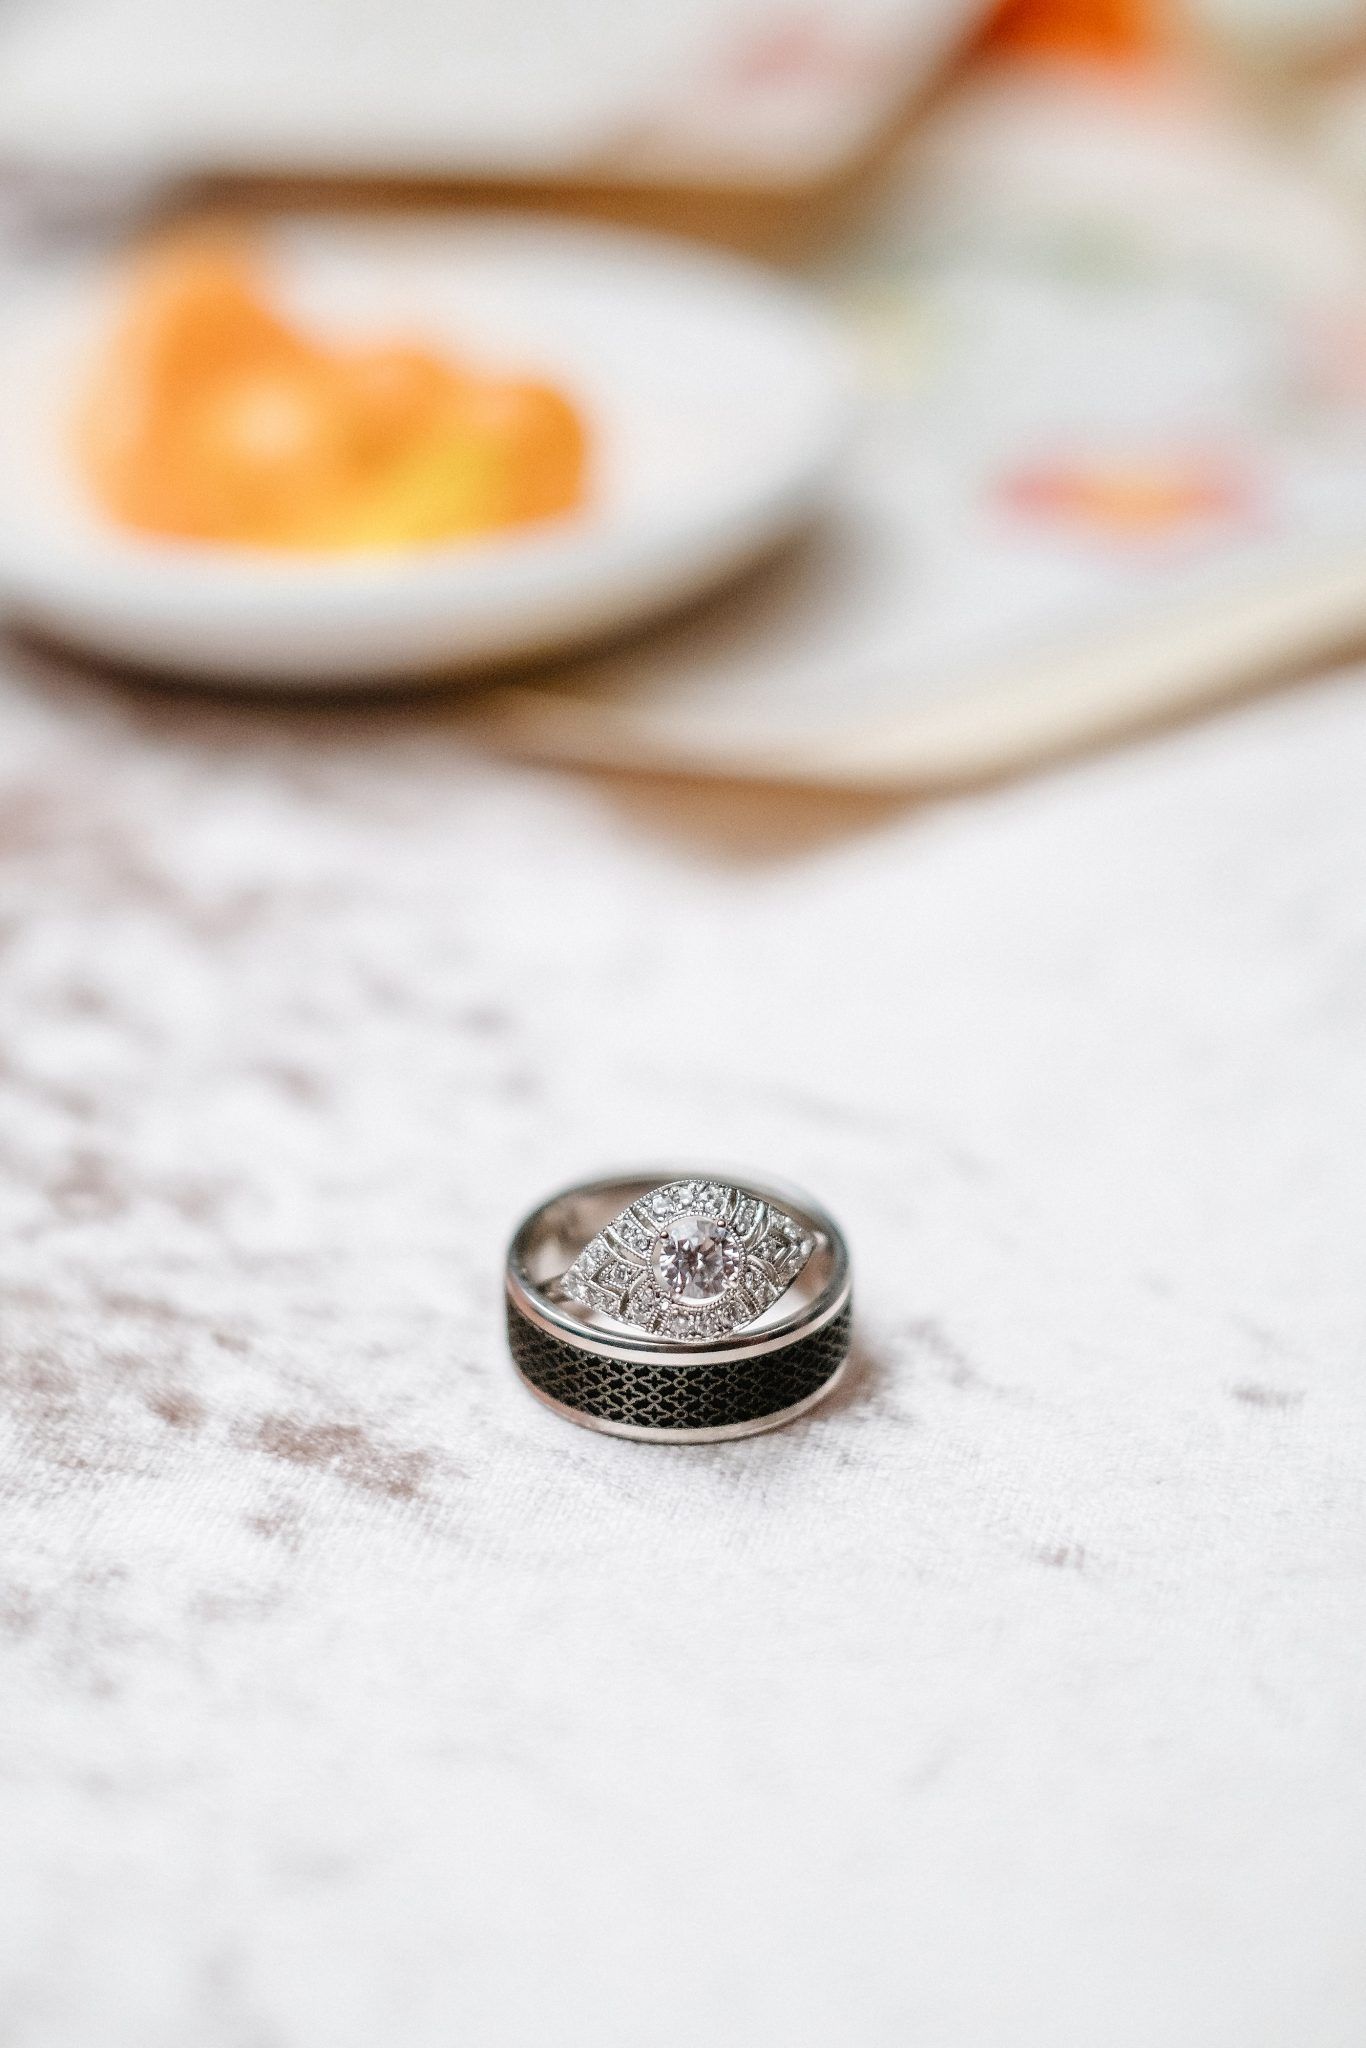 True to Hue Photography Workshop Peach - Vintage Engagement Ring, Diamond Ring, Blush Ring Box, Flatlay Styling